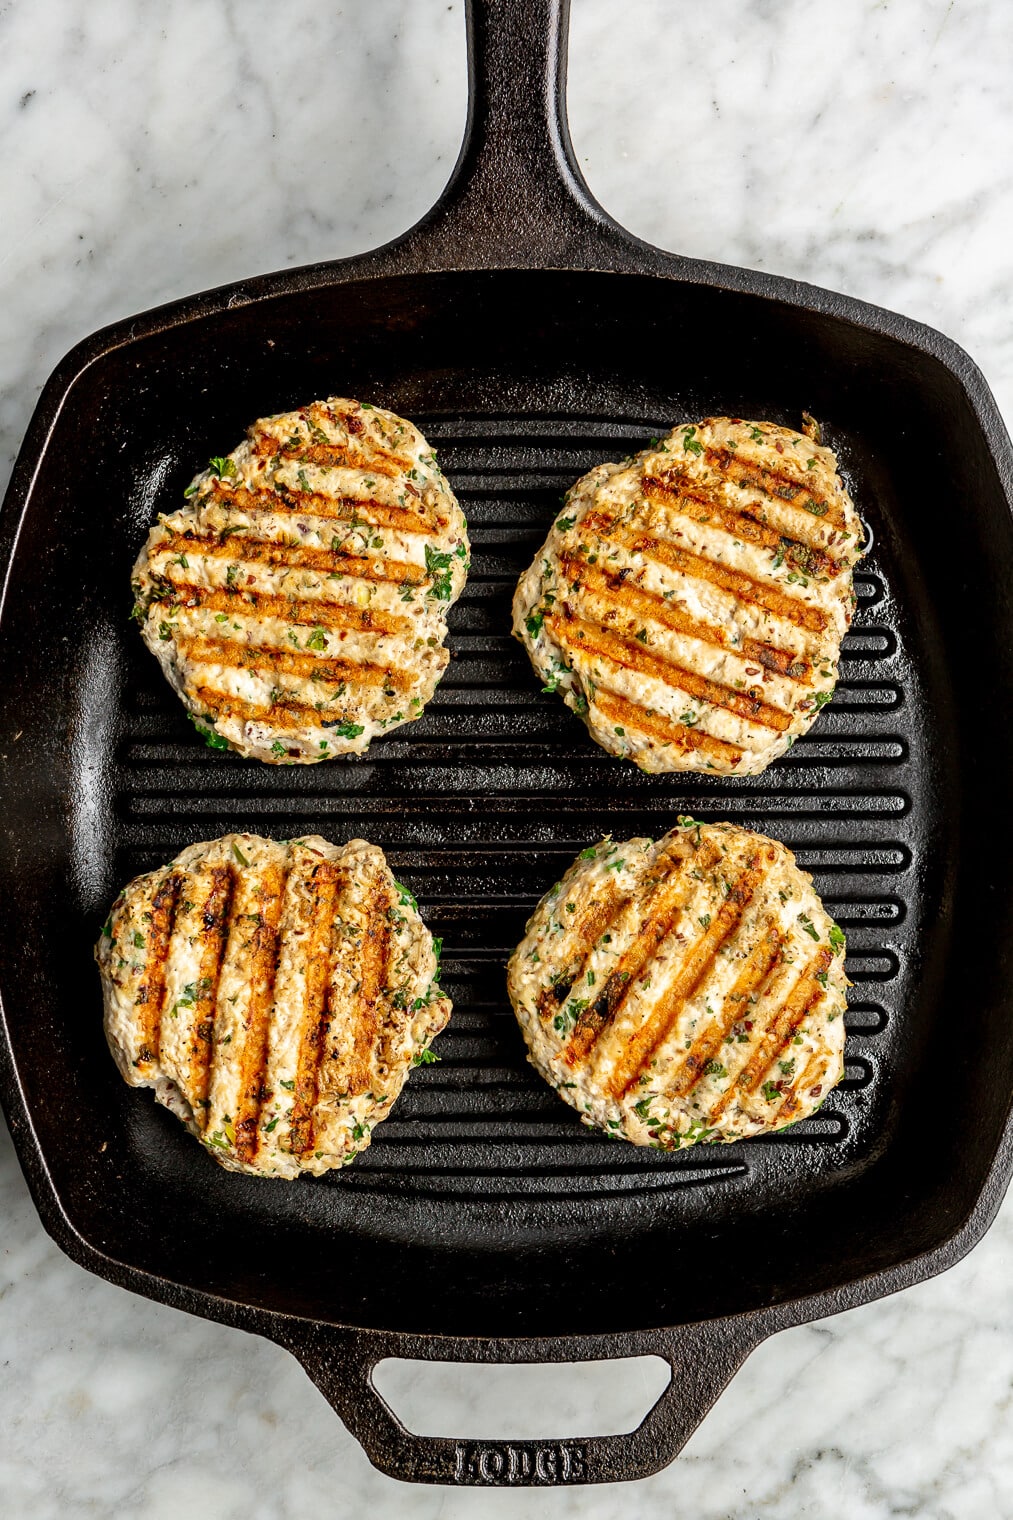 4 chicken burger patties being grilled on a cast iron grill pan.